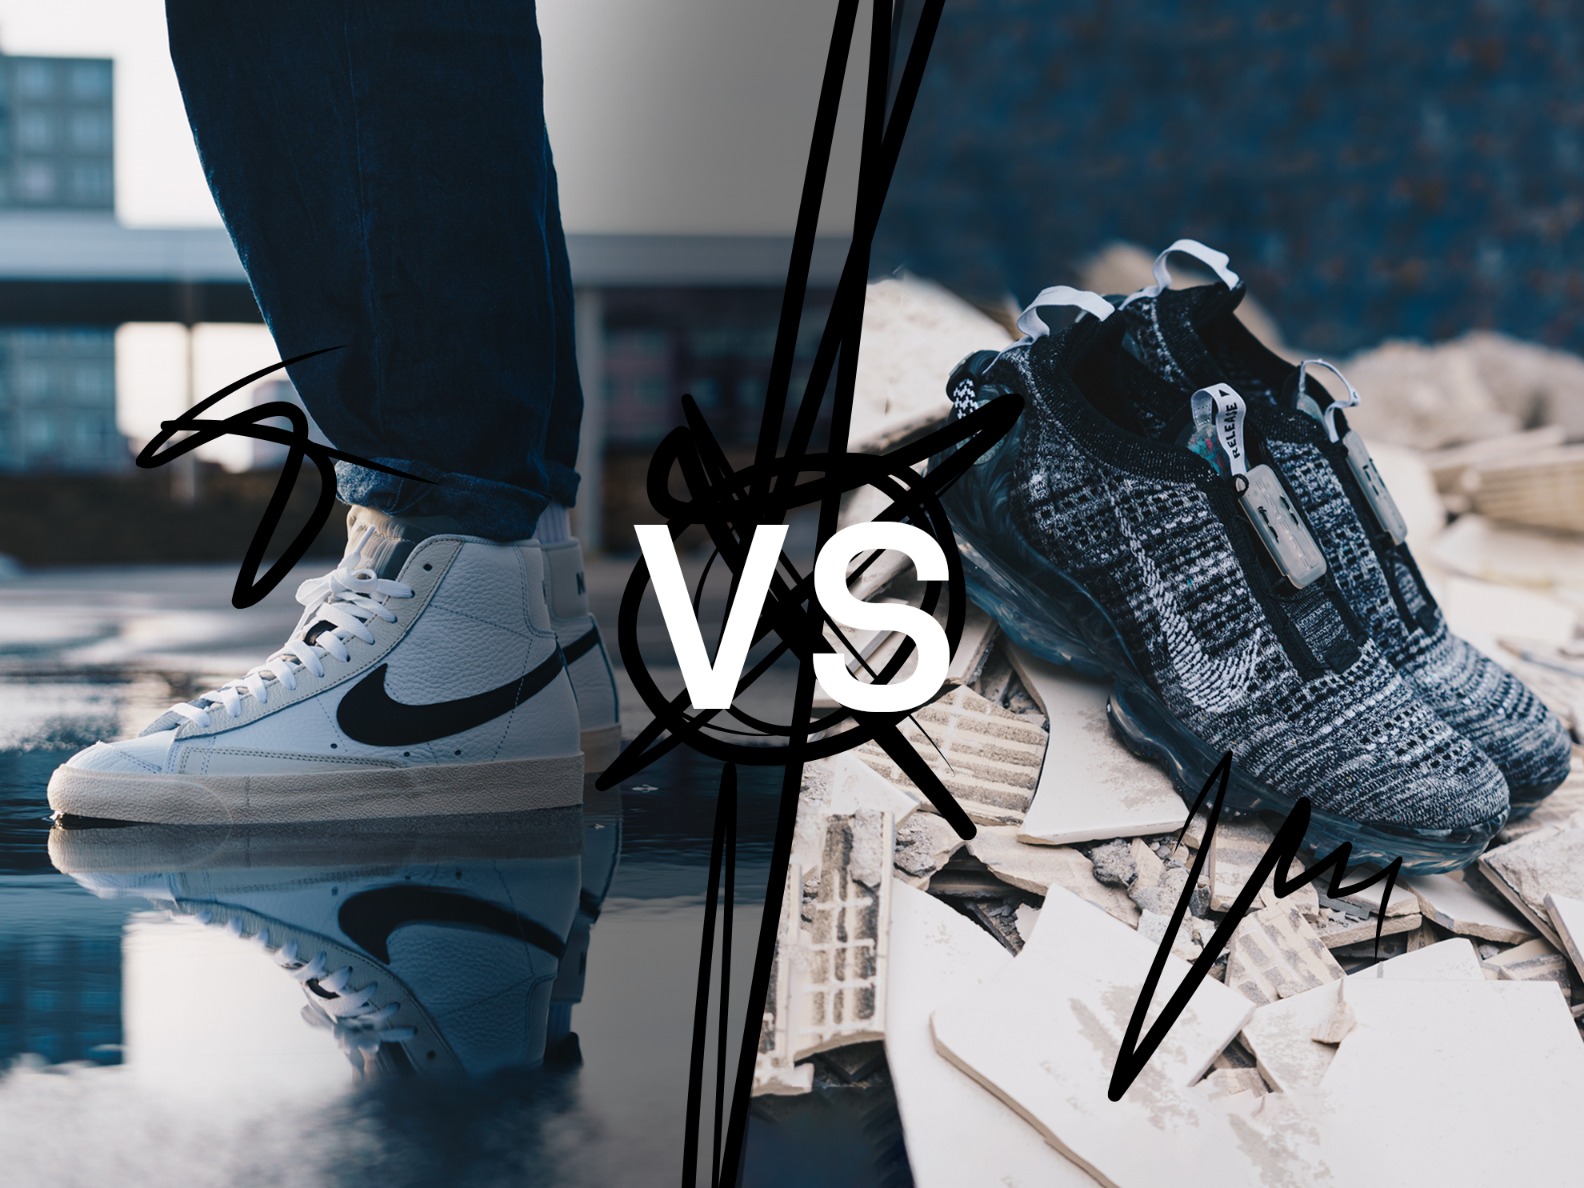 wit rundvlees een vuurtje stoken The Nike Blazer vs the Nike Air Vapormax + our crew's opinions | FTSHP blog